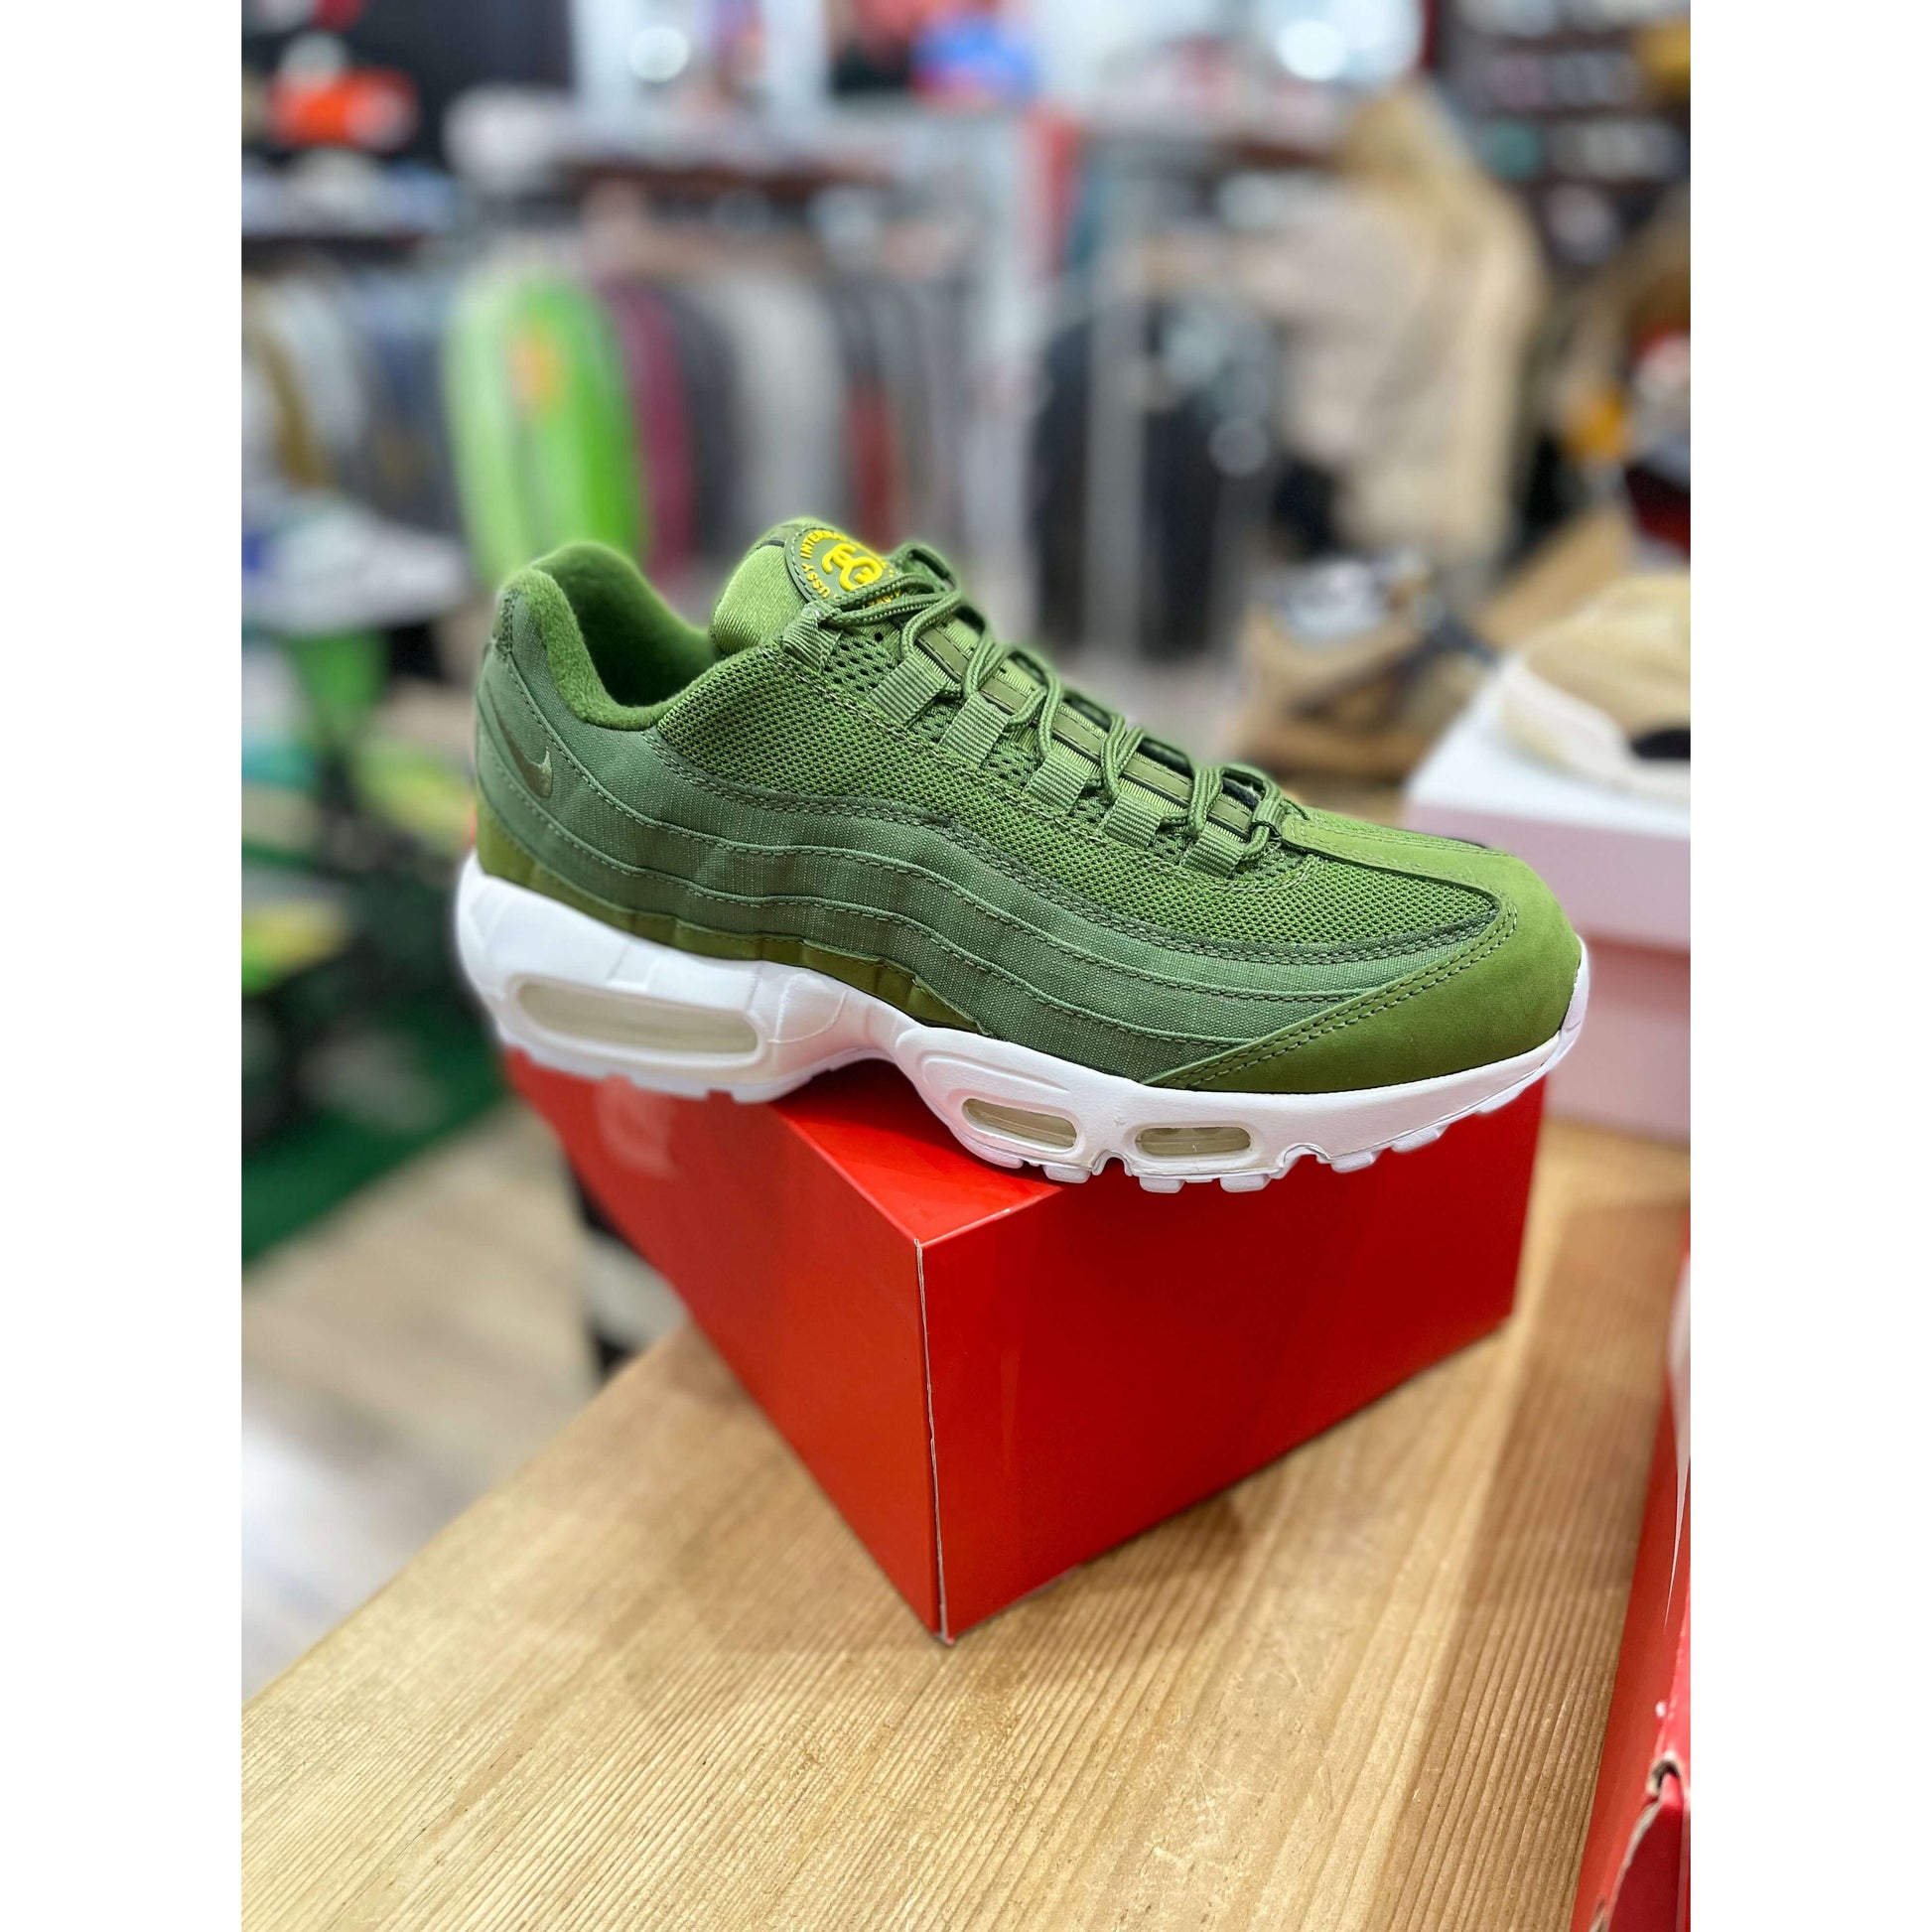 Air Max 95 Stussy Olive from Nike